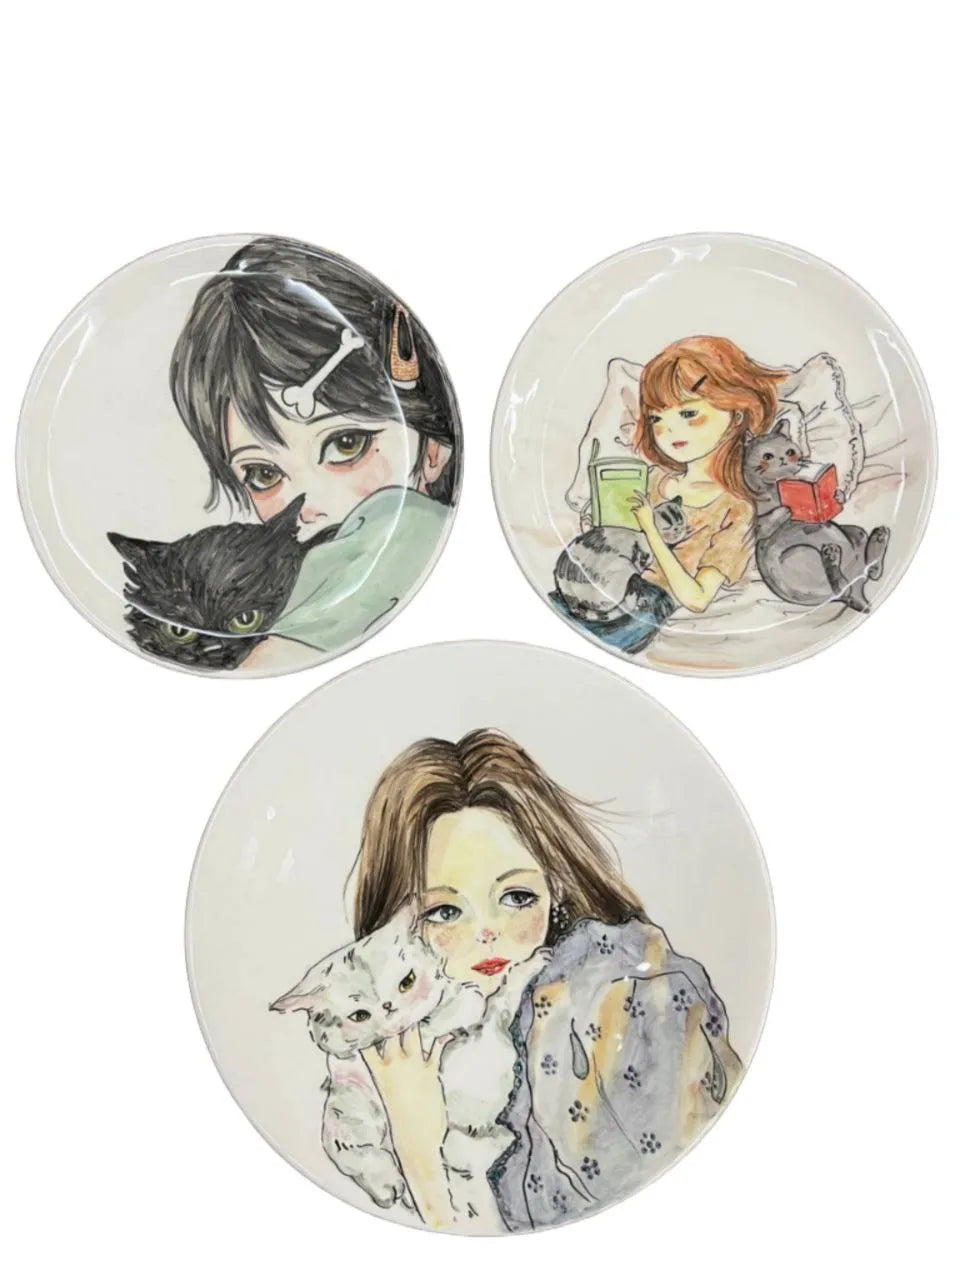 Hand-painted ceramic plates with cats, girls in winter days theme, 3 pieces wall art & decor